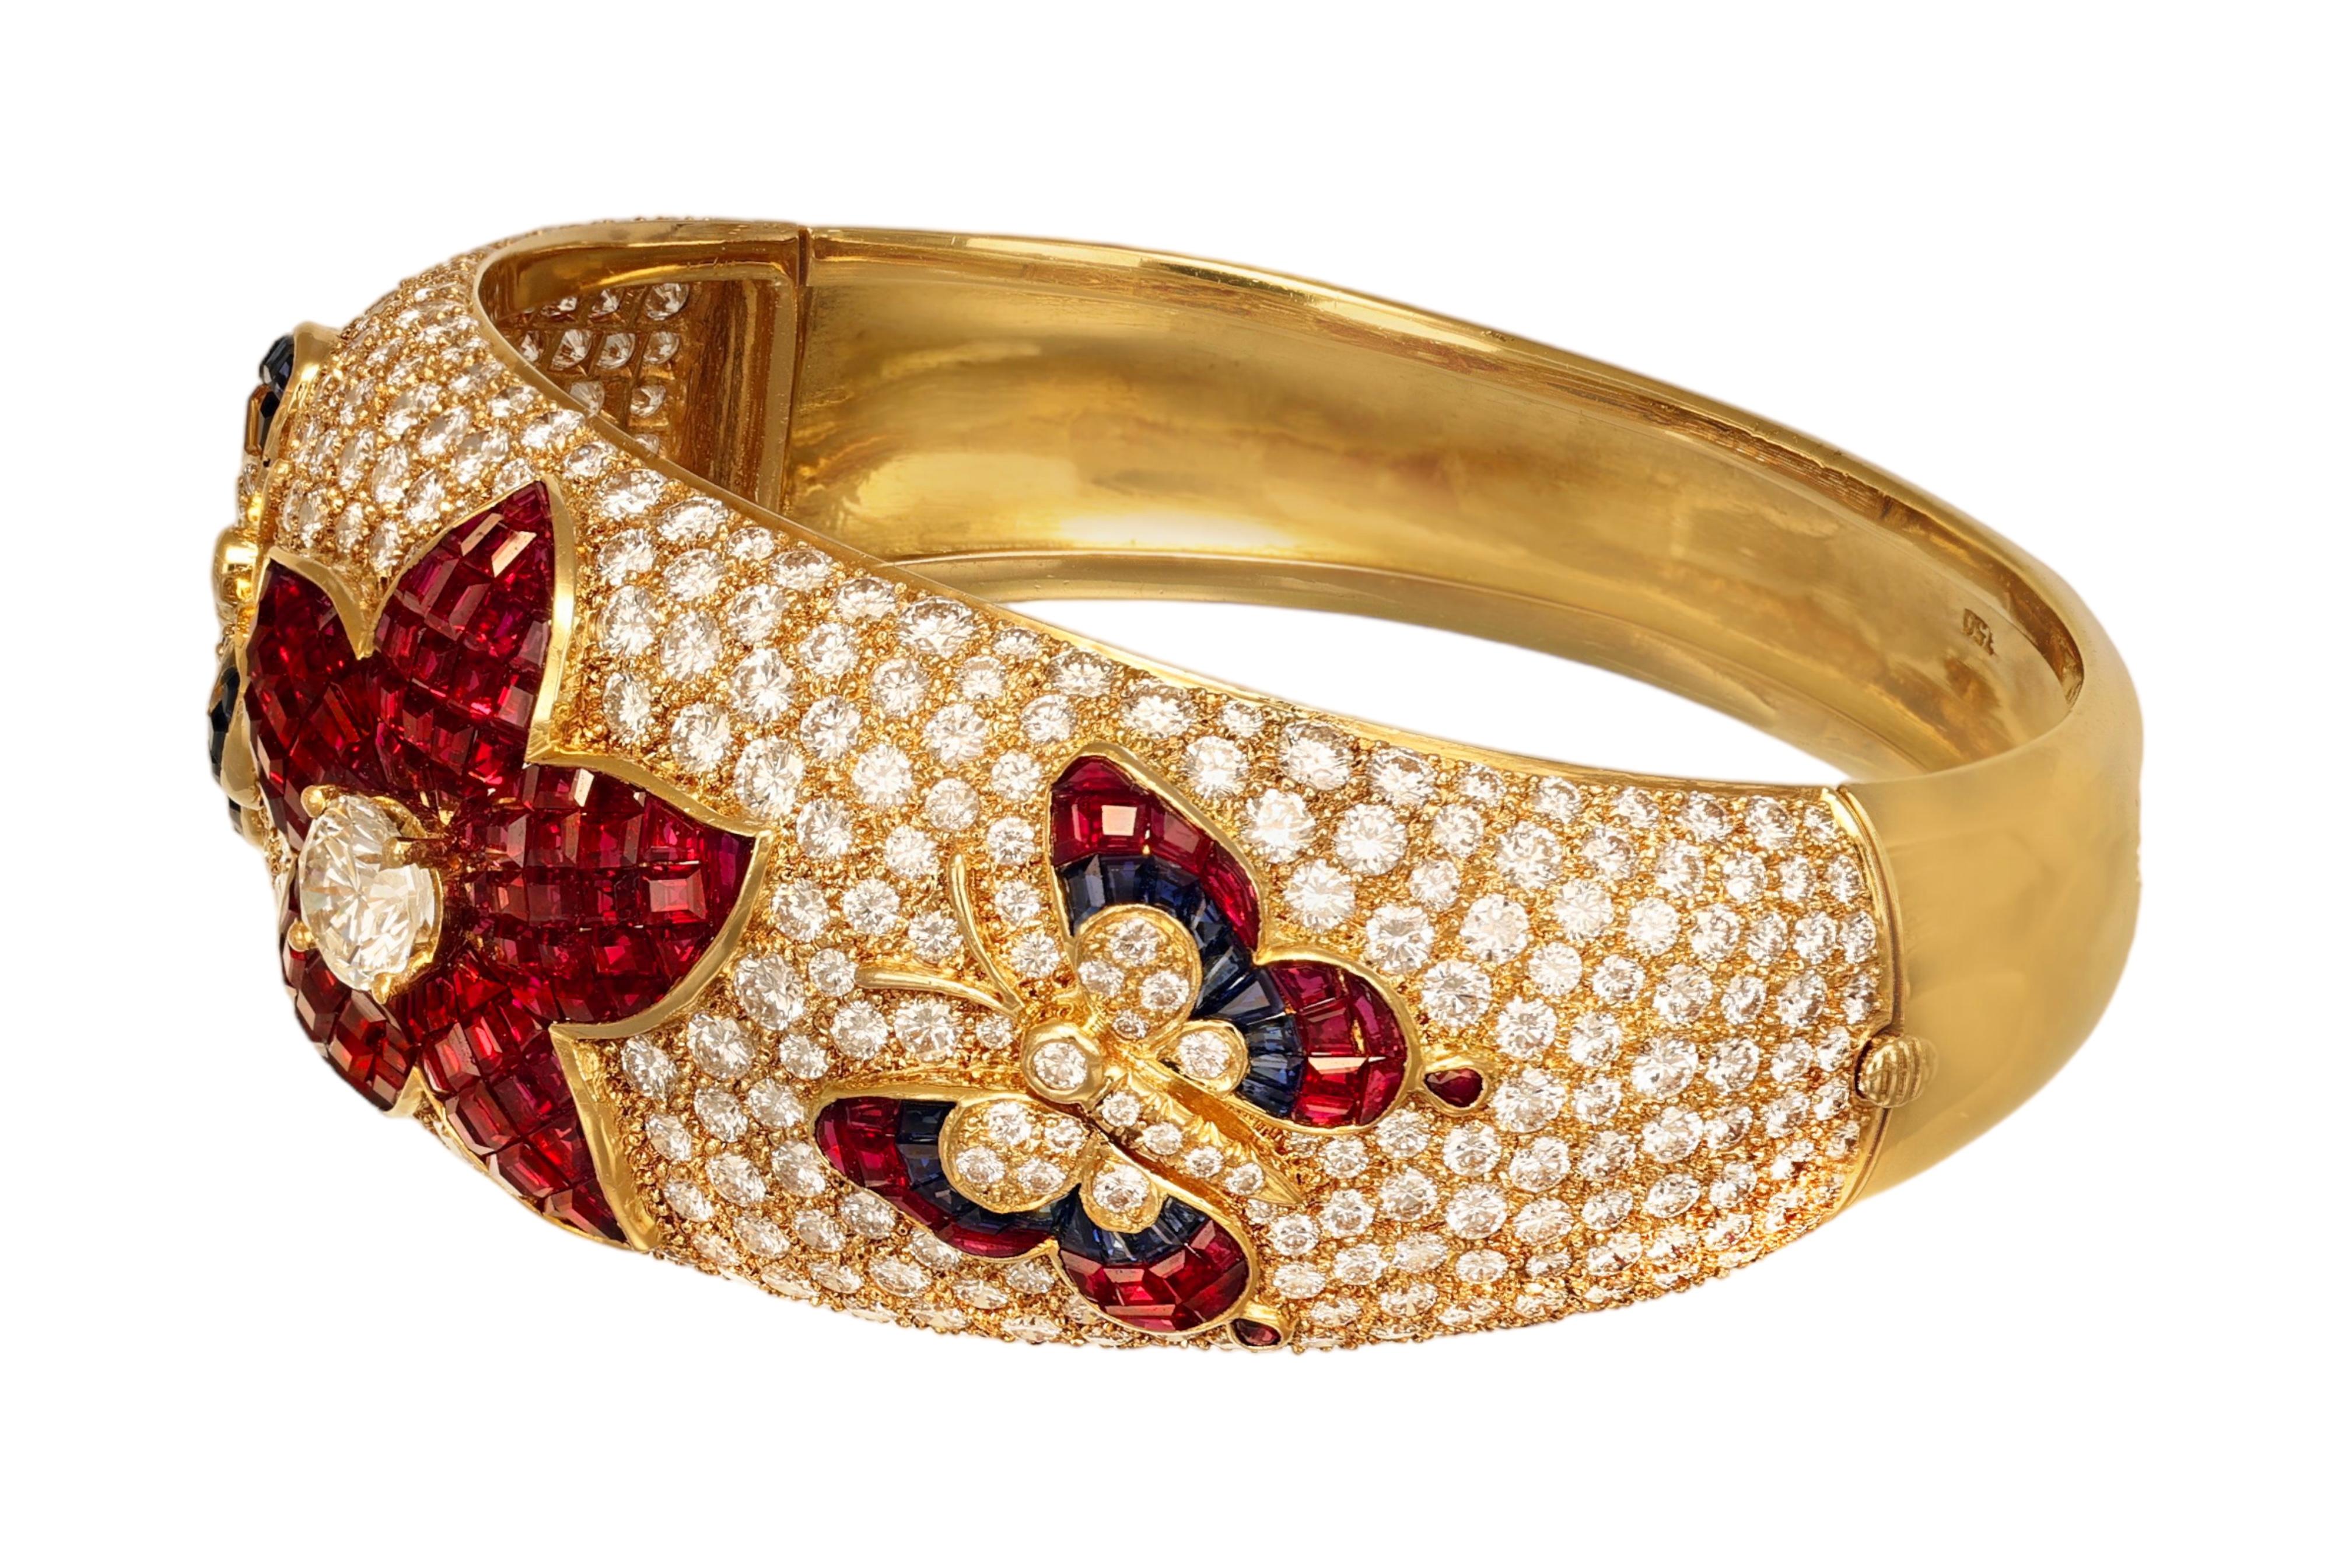 18 kt. Yellow Gold Wide Bangle Bracelet With Diamonds, Rubies, Sapphires For Sale 3